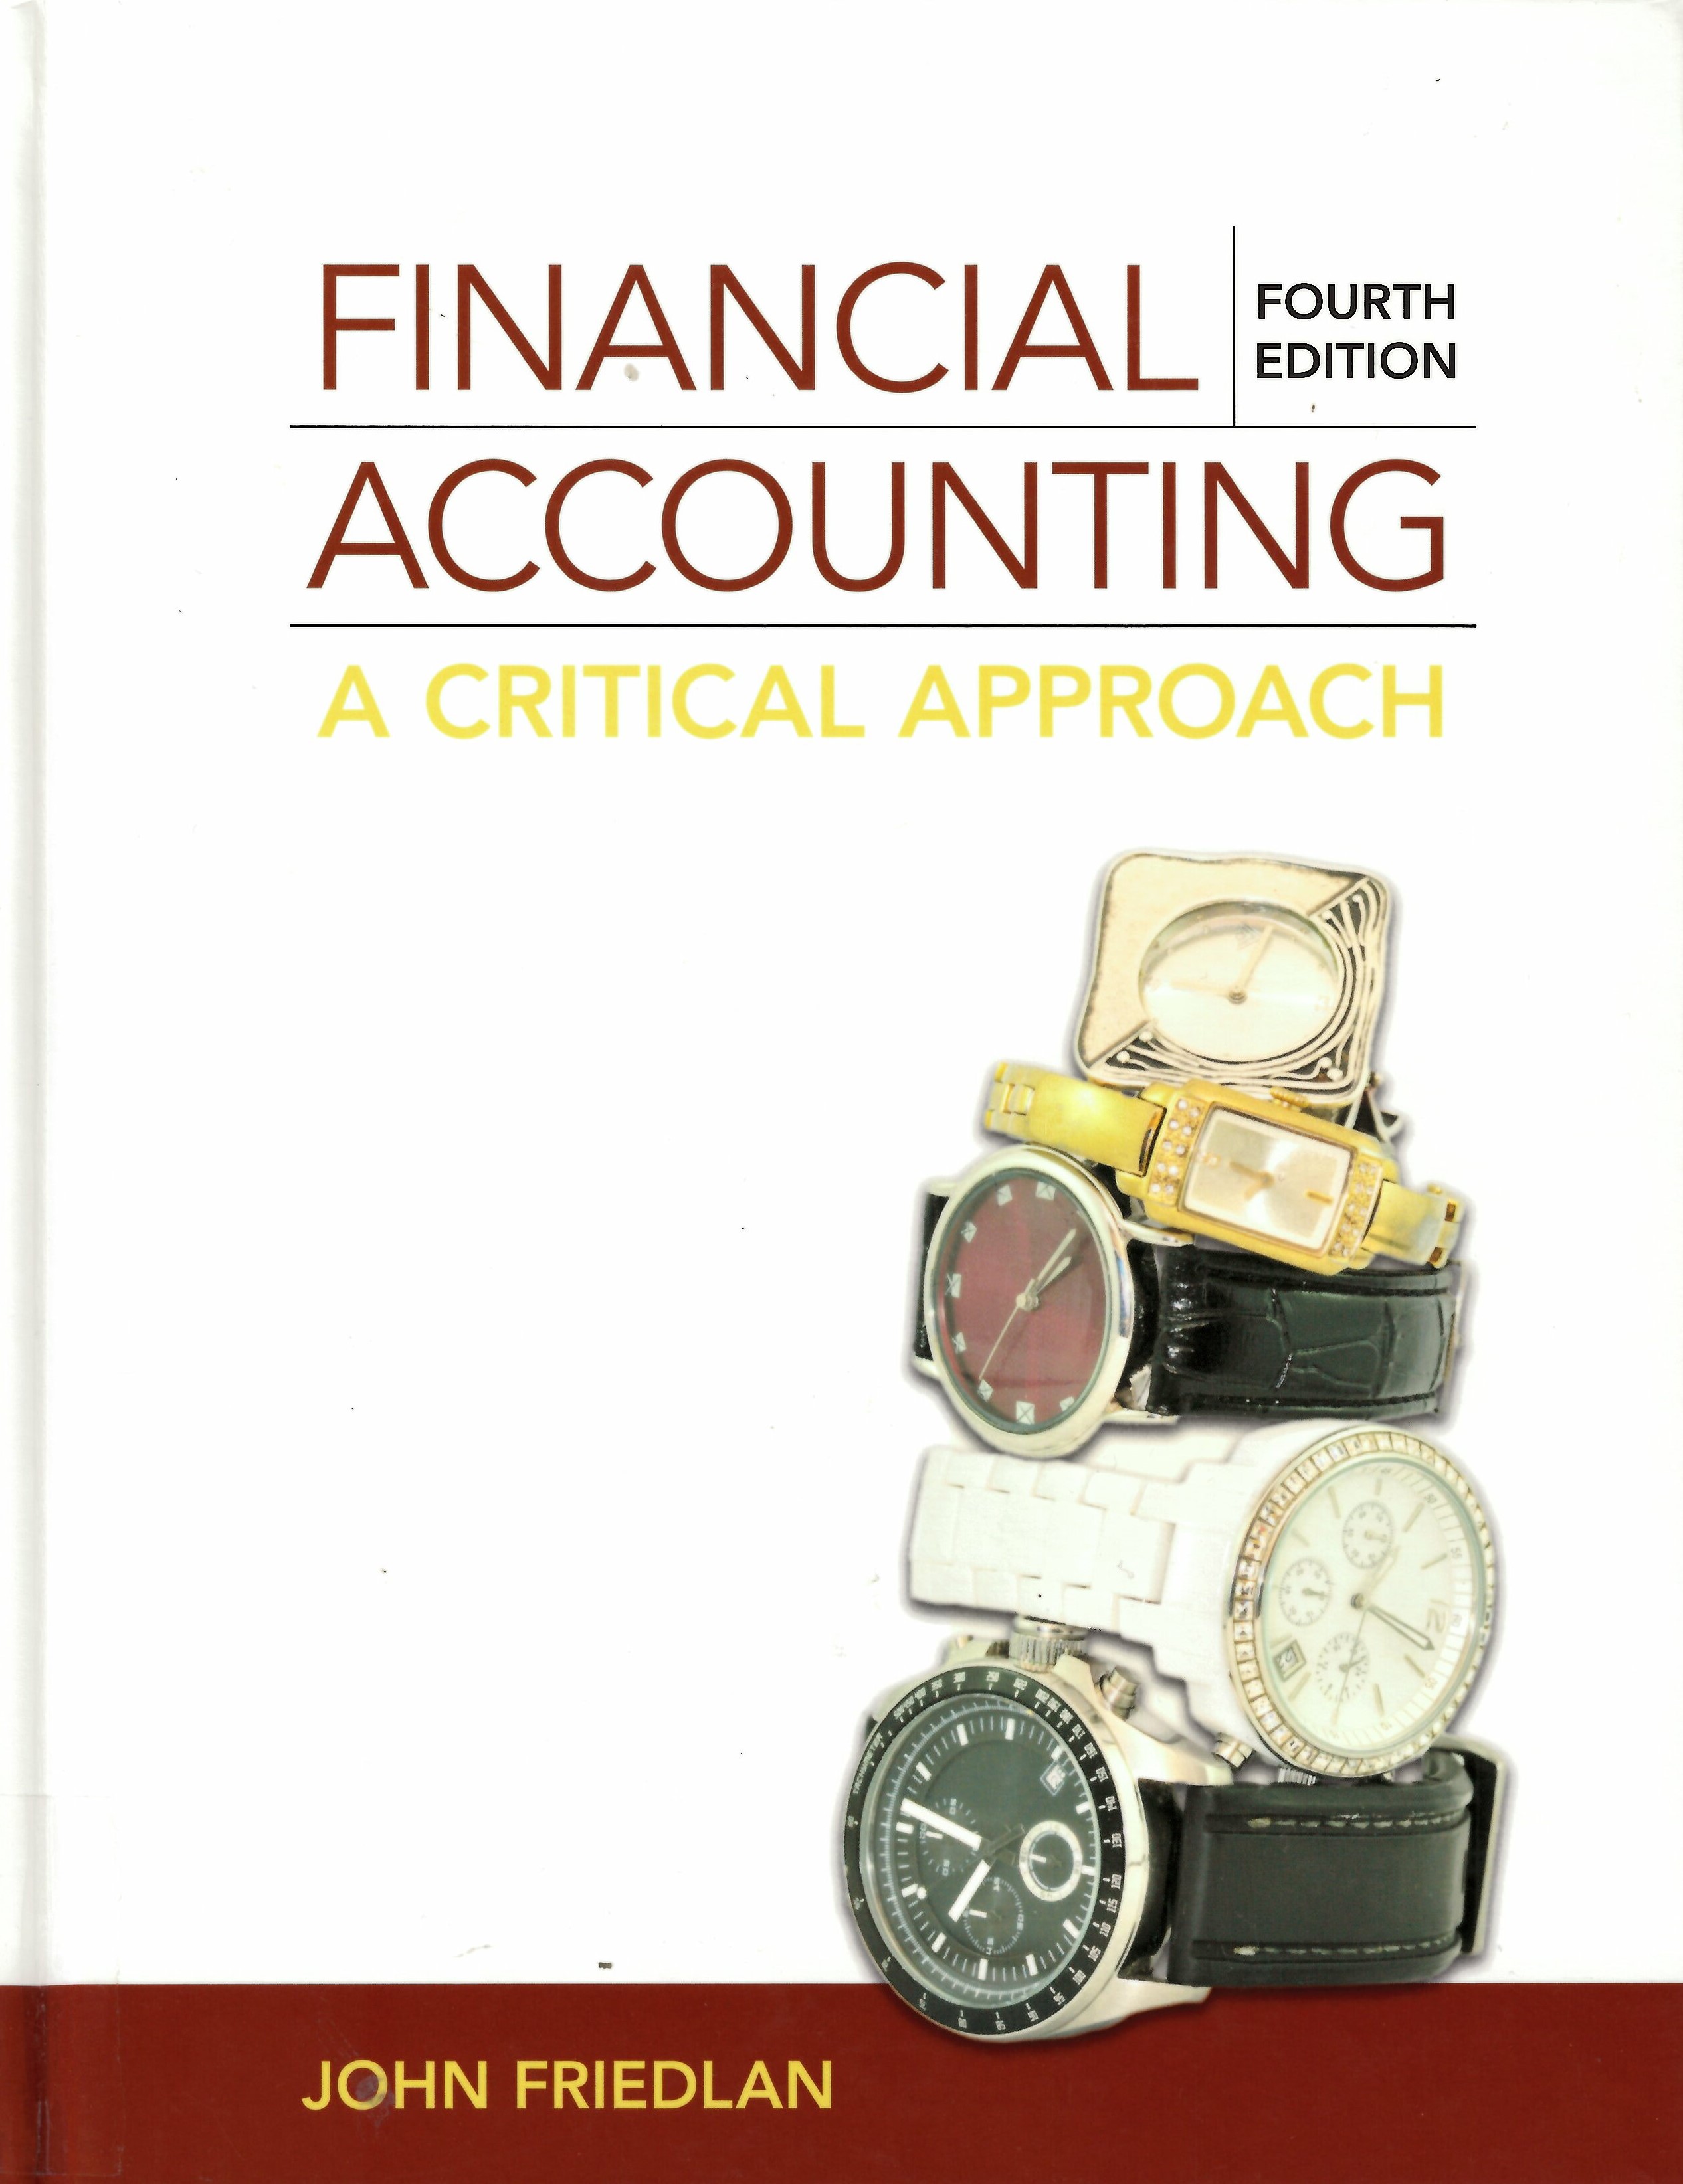 Financial accounting : a critical approach